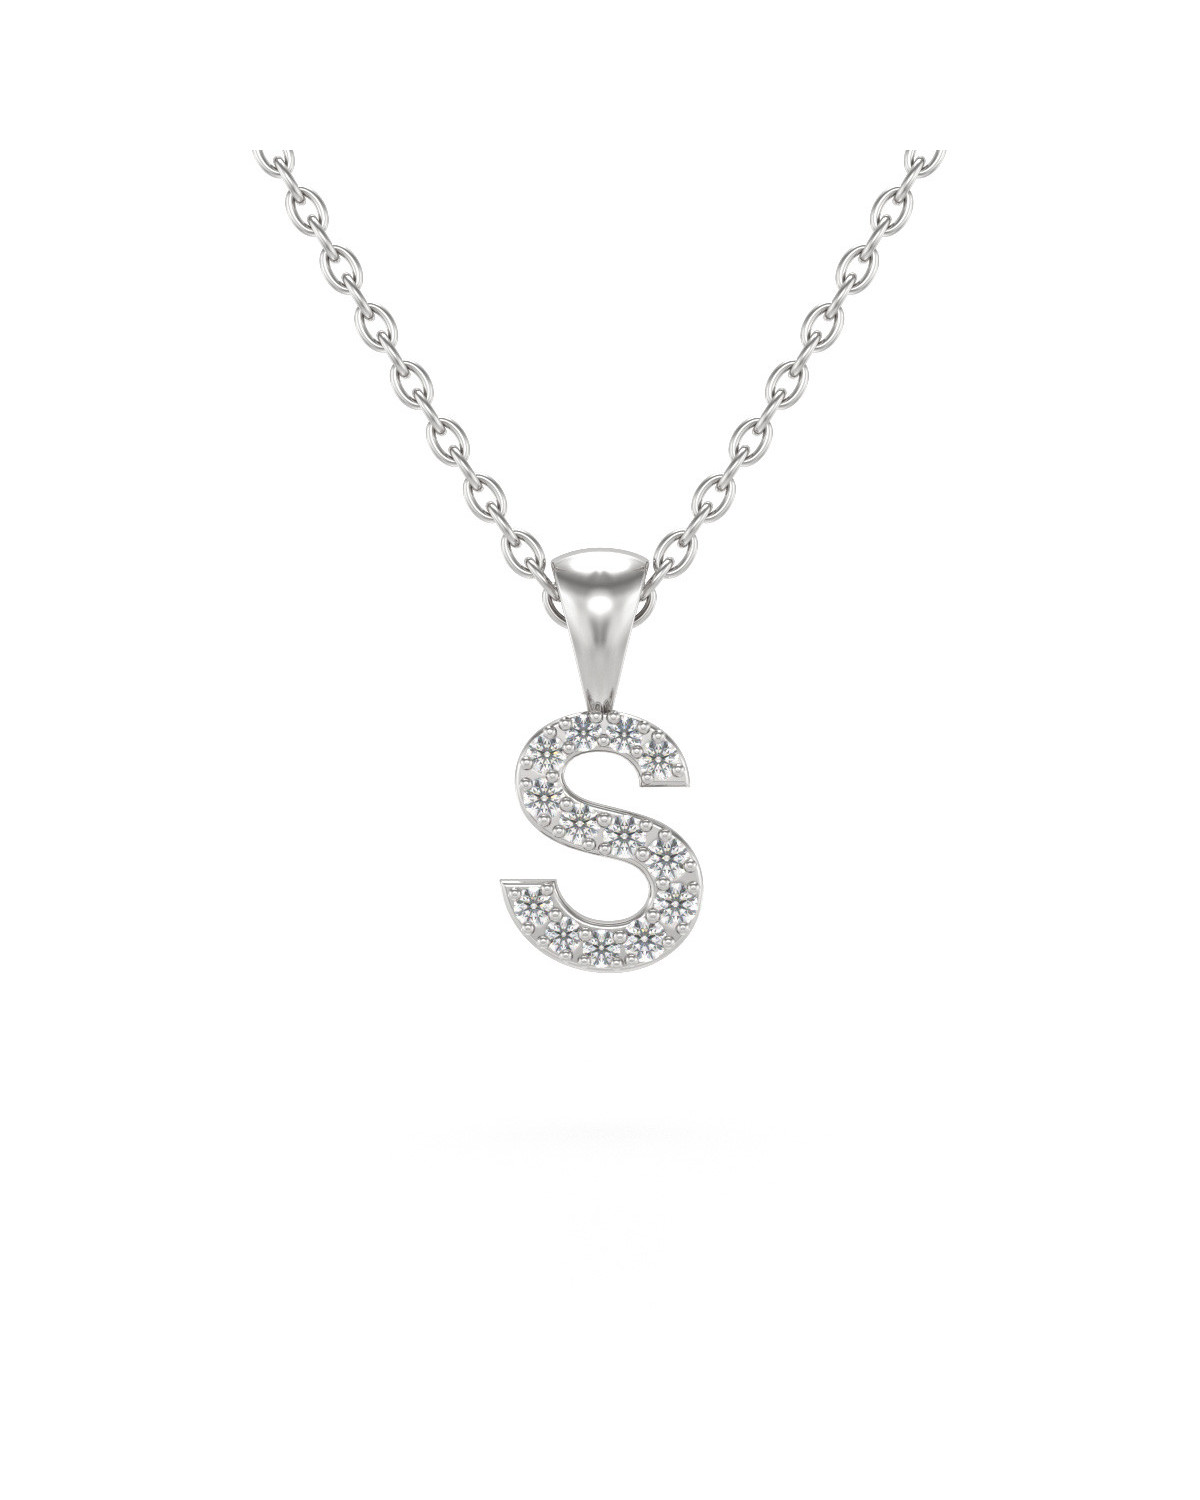 Collier Pendentif Lettre S Or Blanc Diamant Chaine Or incluse 0.72grs